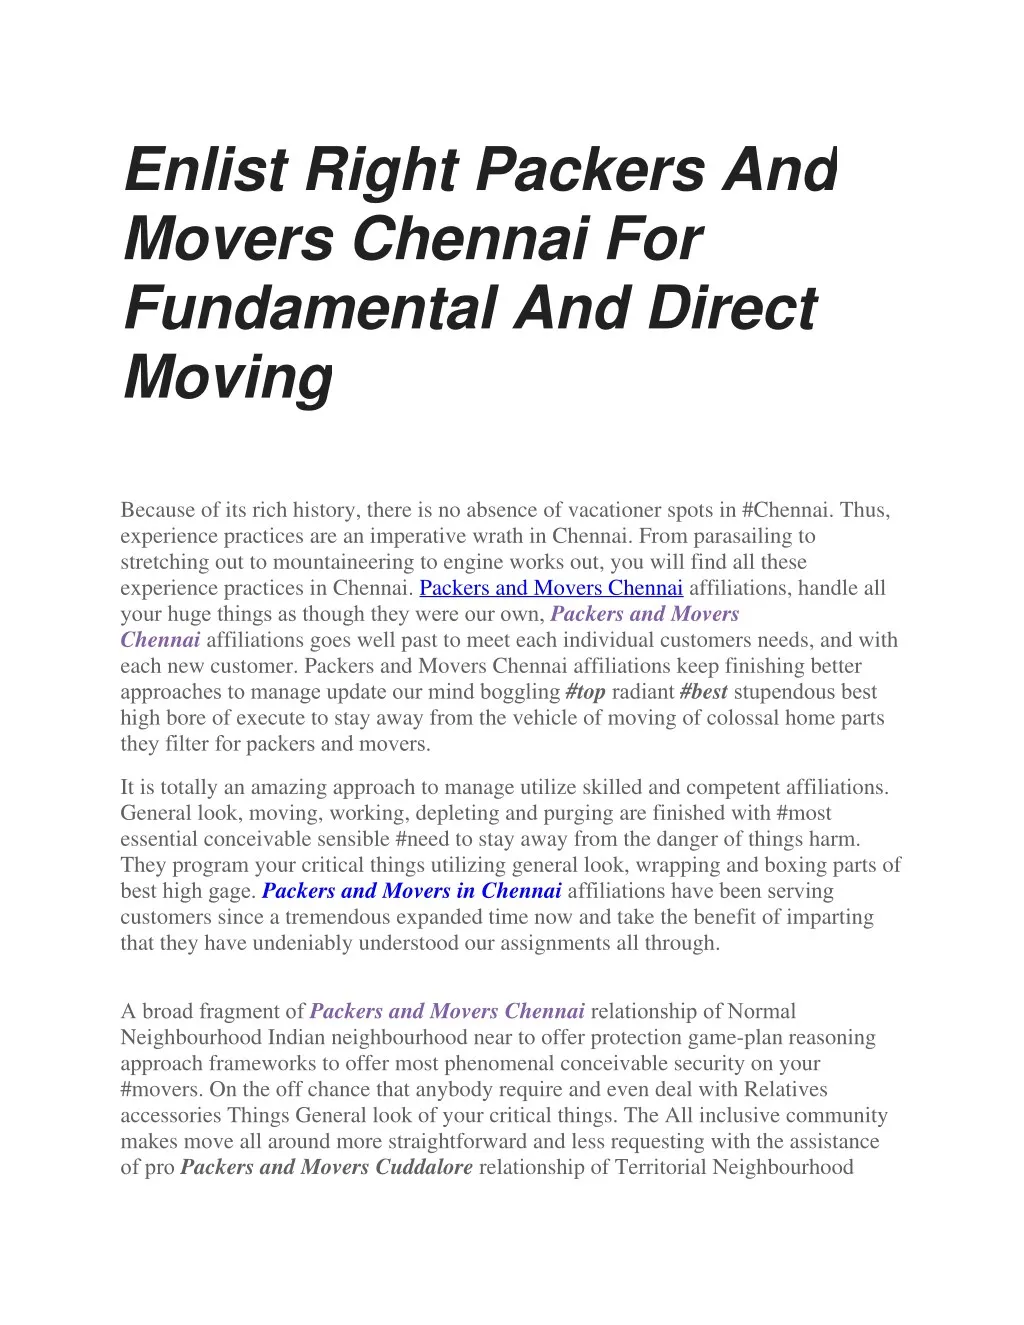 enlist right packers and movers chennai